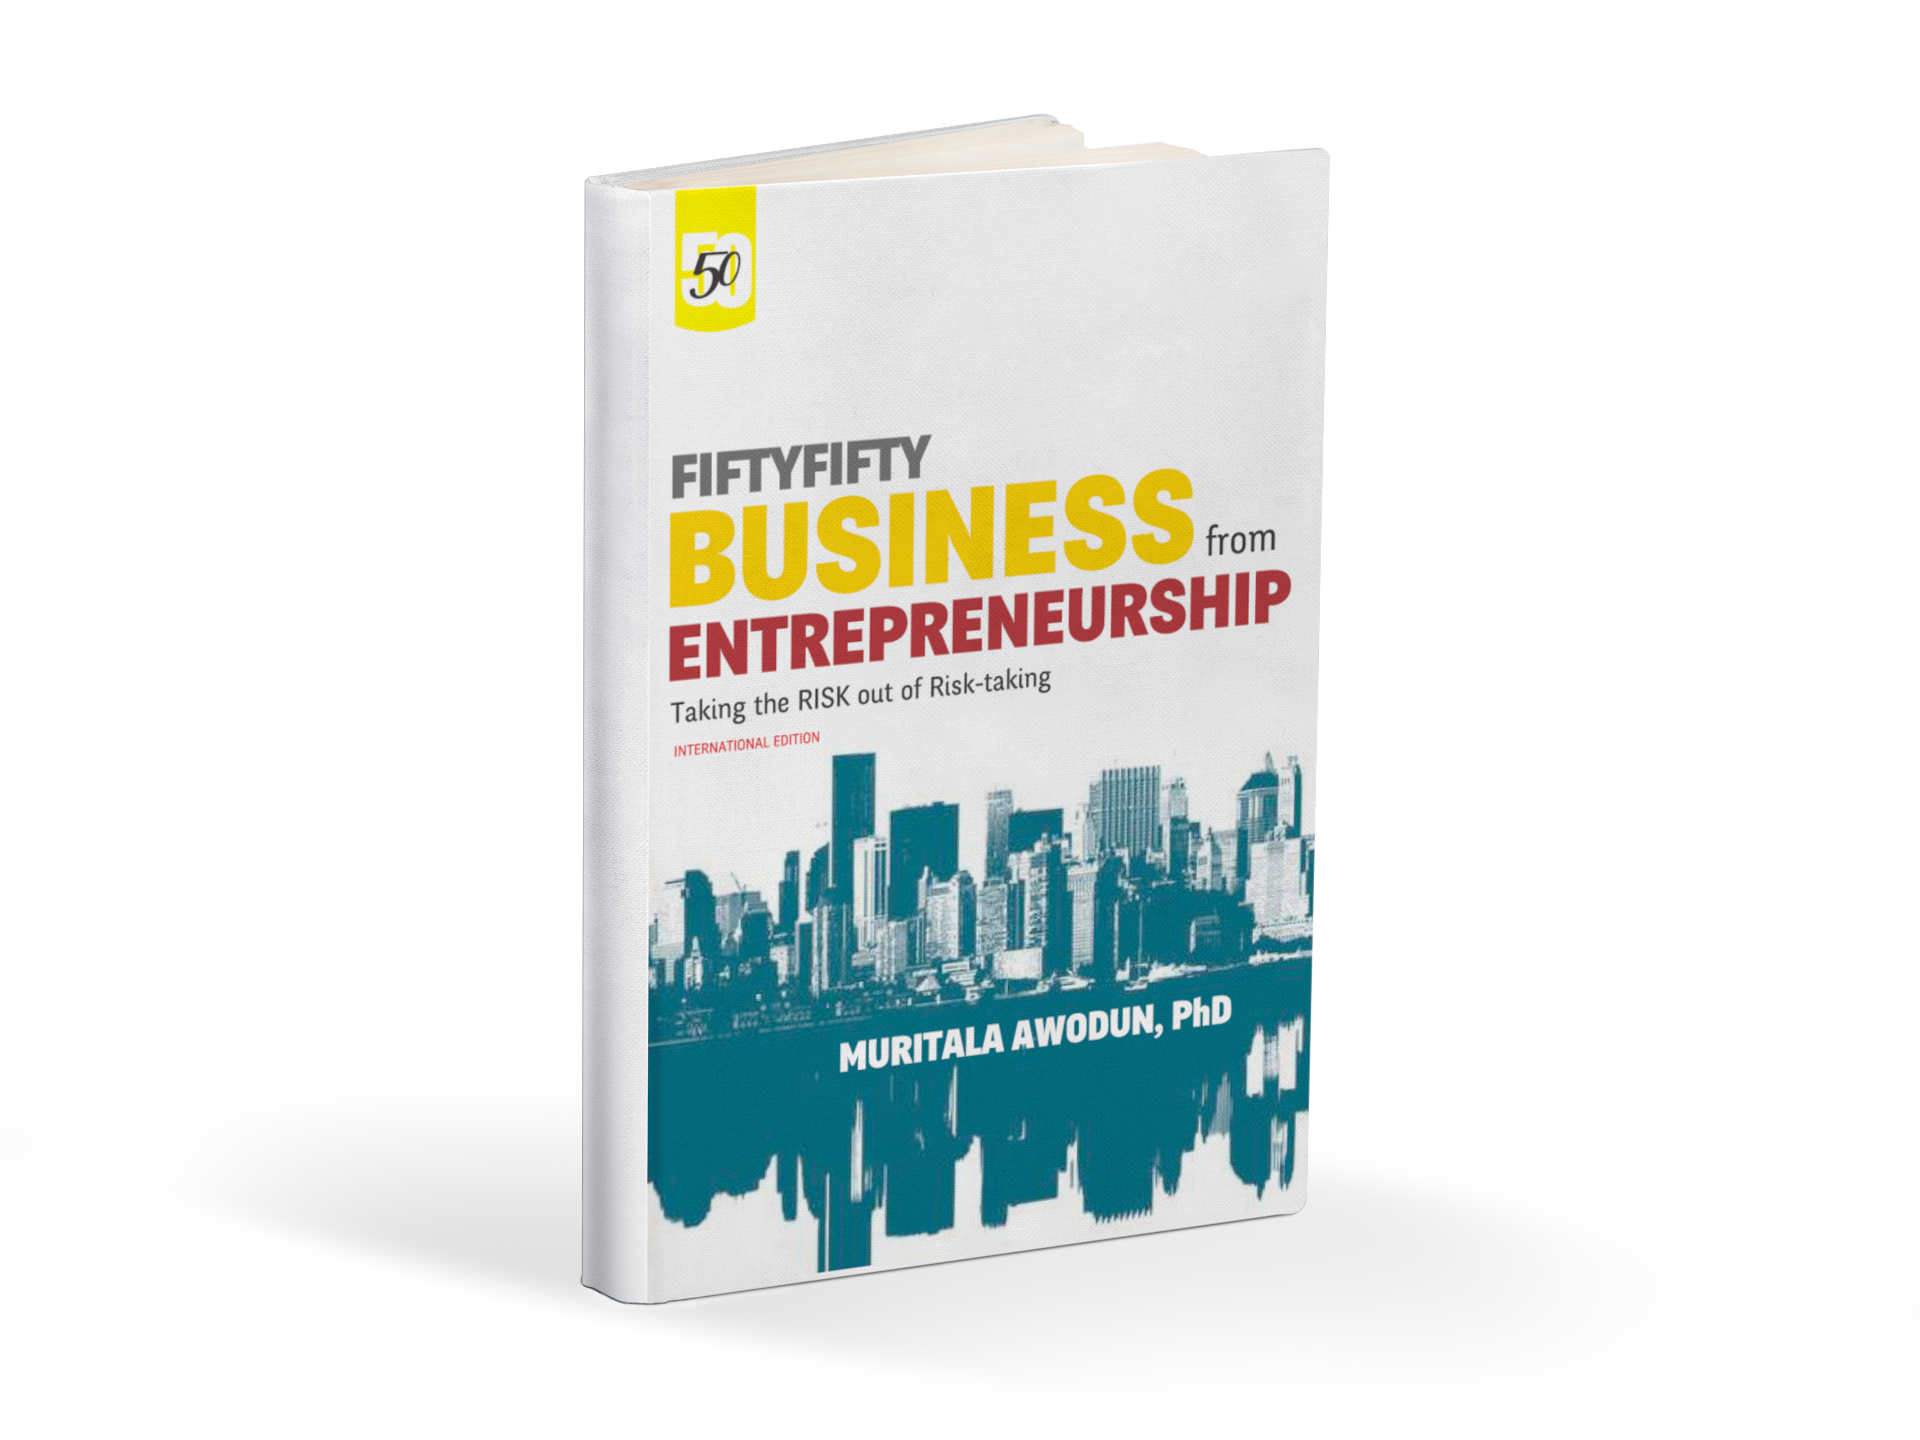 fifty-fifty business revised edition mockup